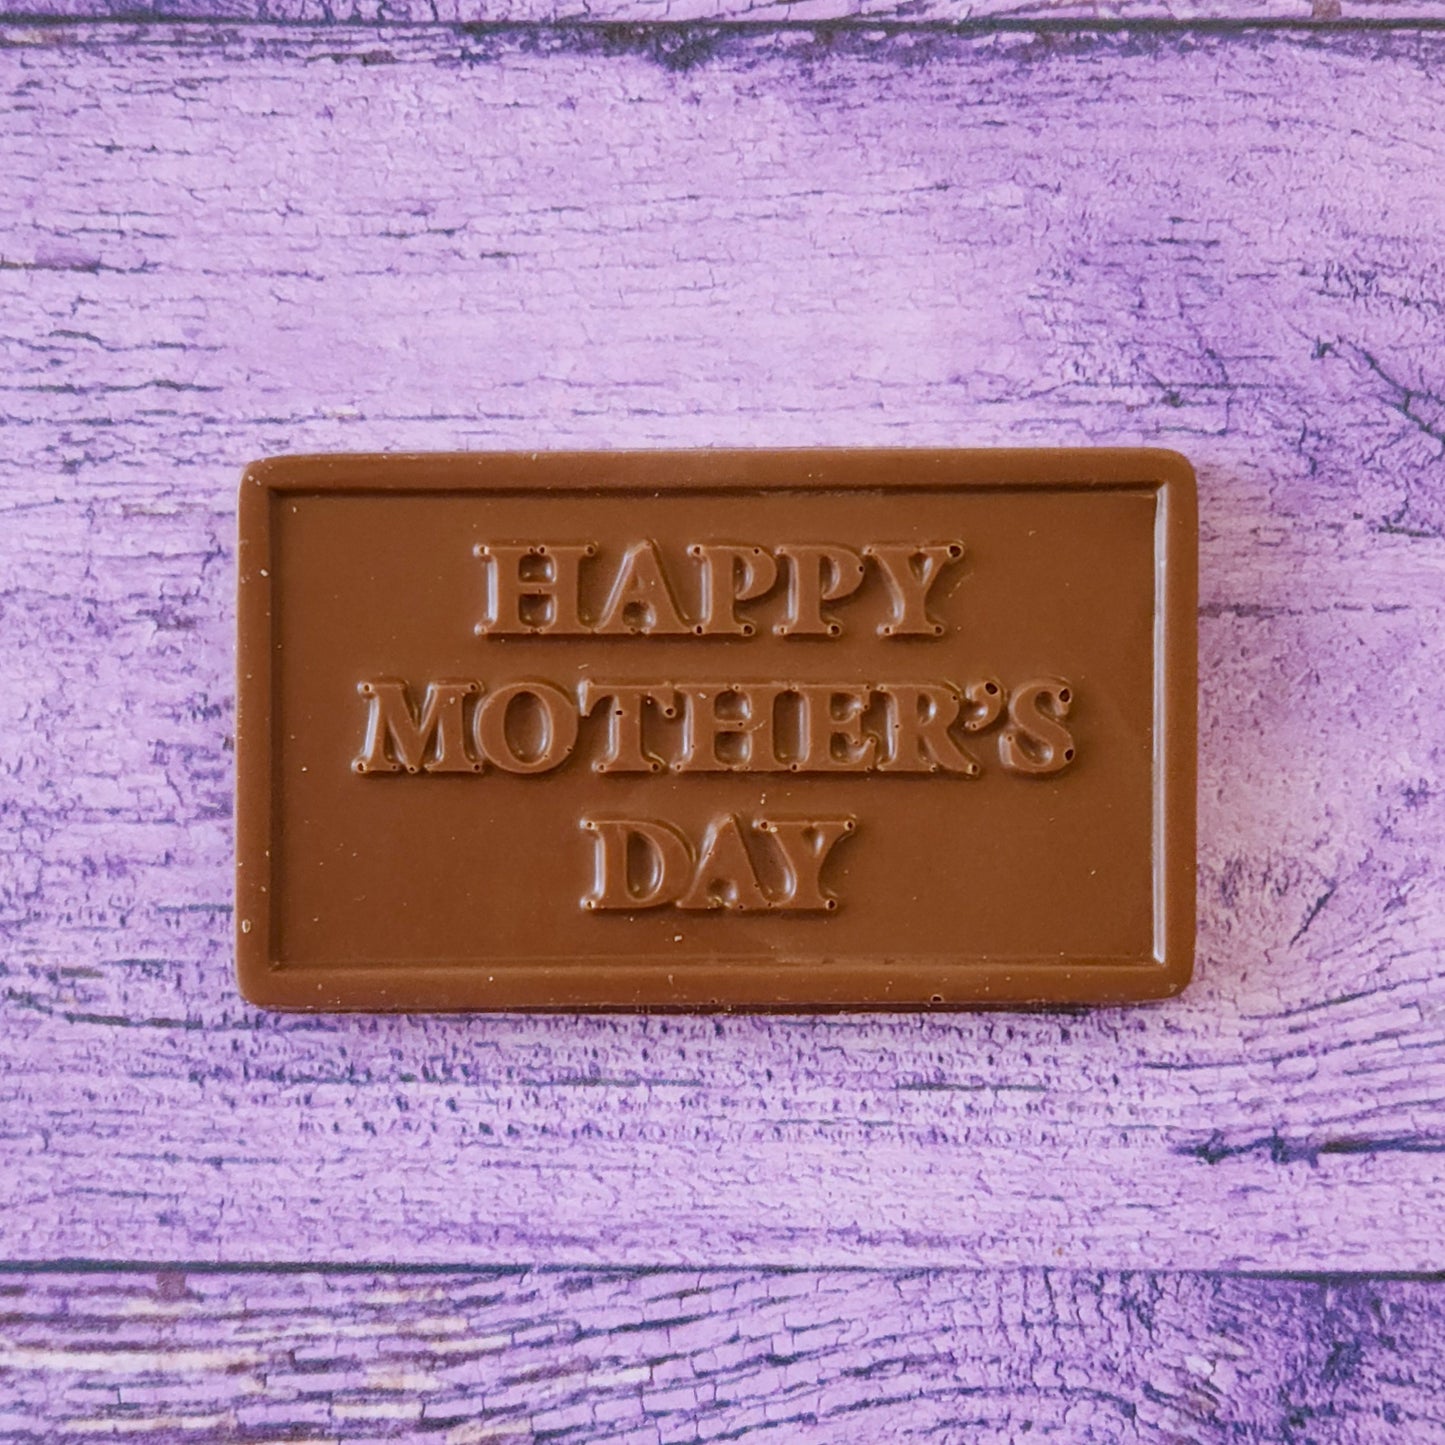 A chocolate card that says Happy Mother's Day. Makes a great gift for Mom.